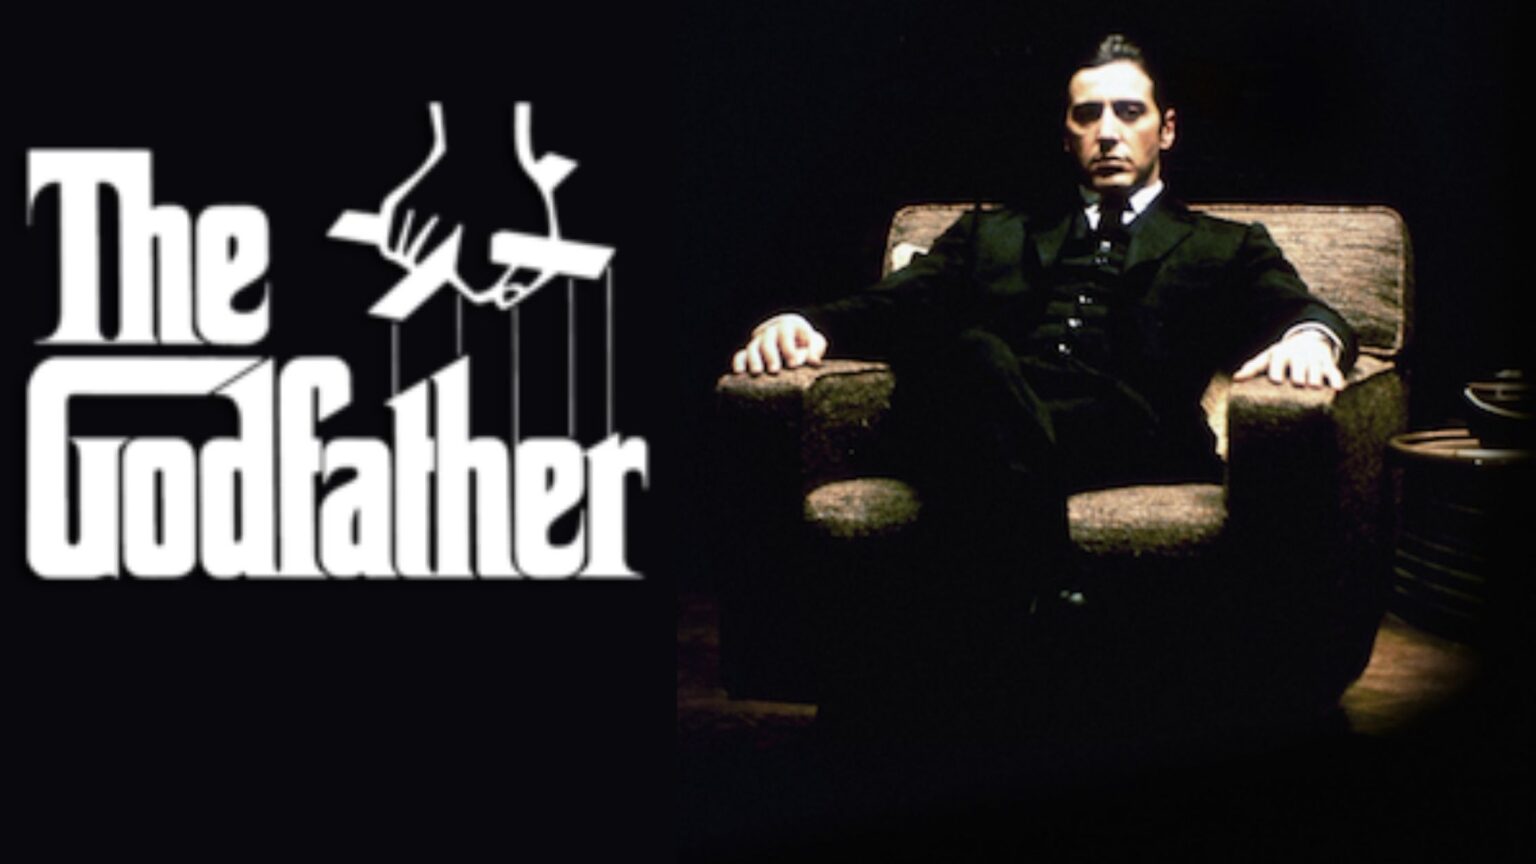 Watch The Godfather Trilogy on NetFlix From Anywhere in the World